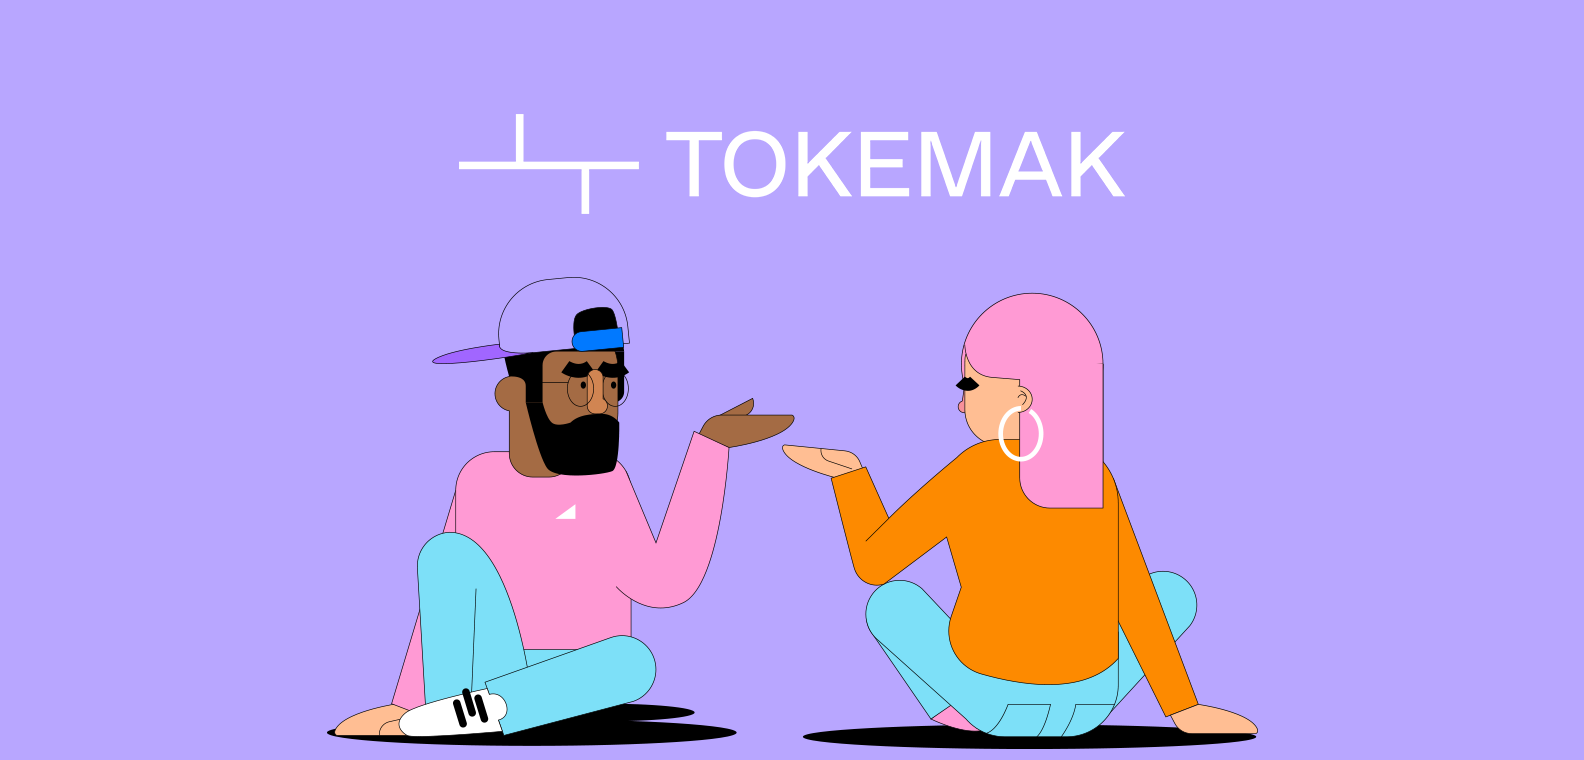 What Is Tokemak And How Does It Work?